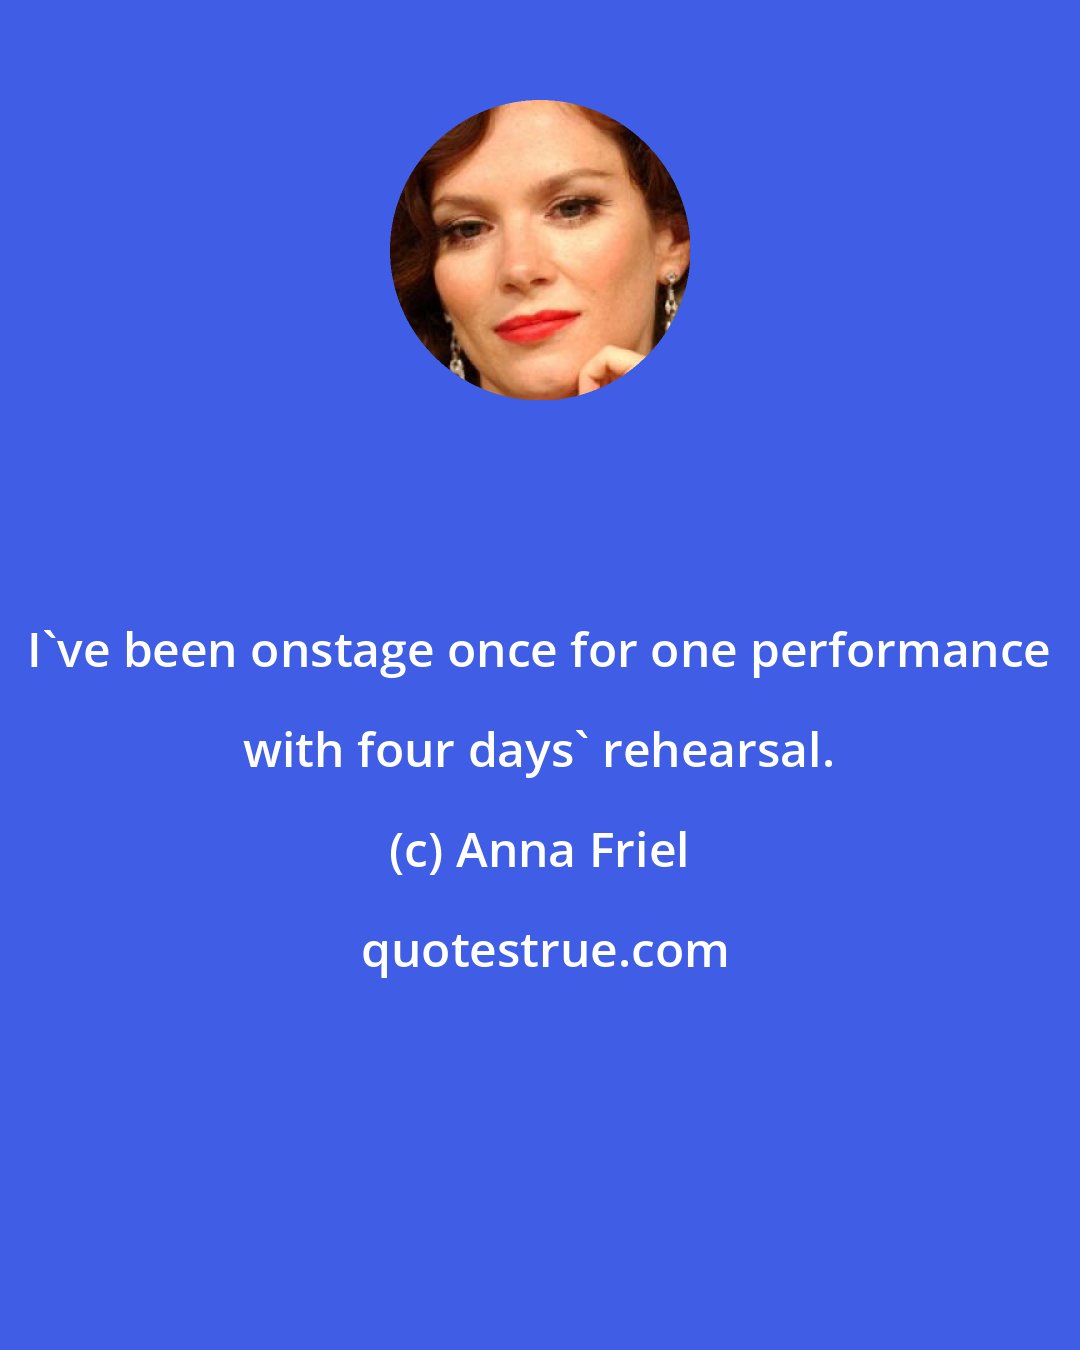 Anna Friel: I've been onstage once for one performance with four days' rehearsal.